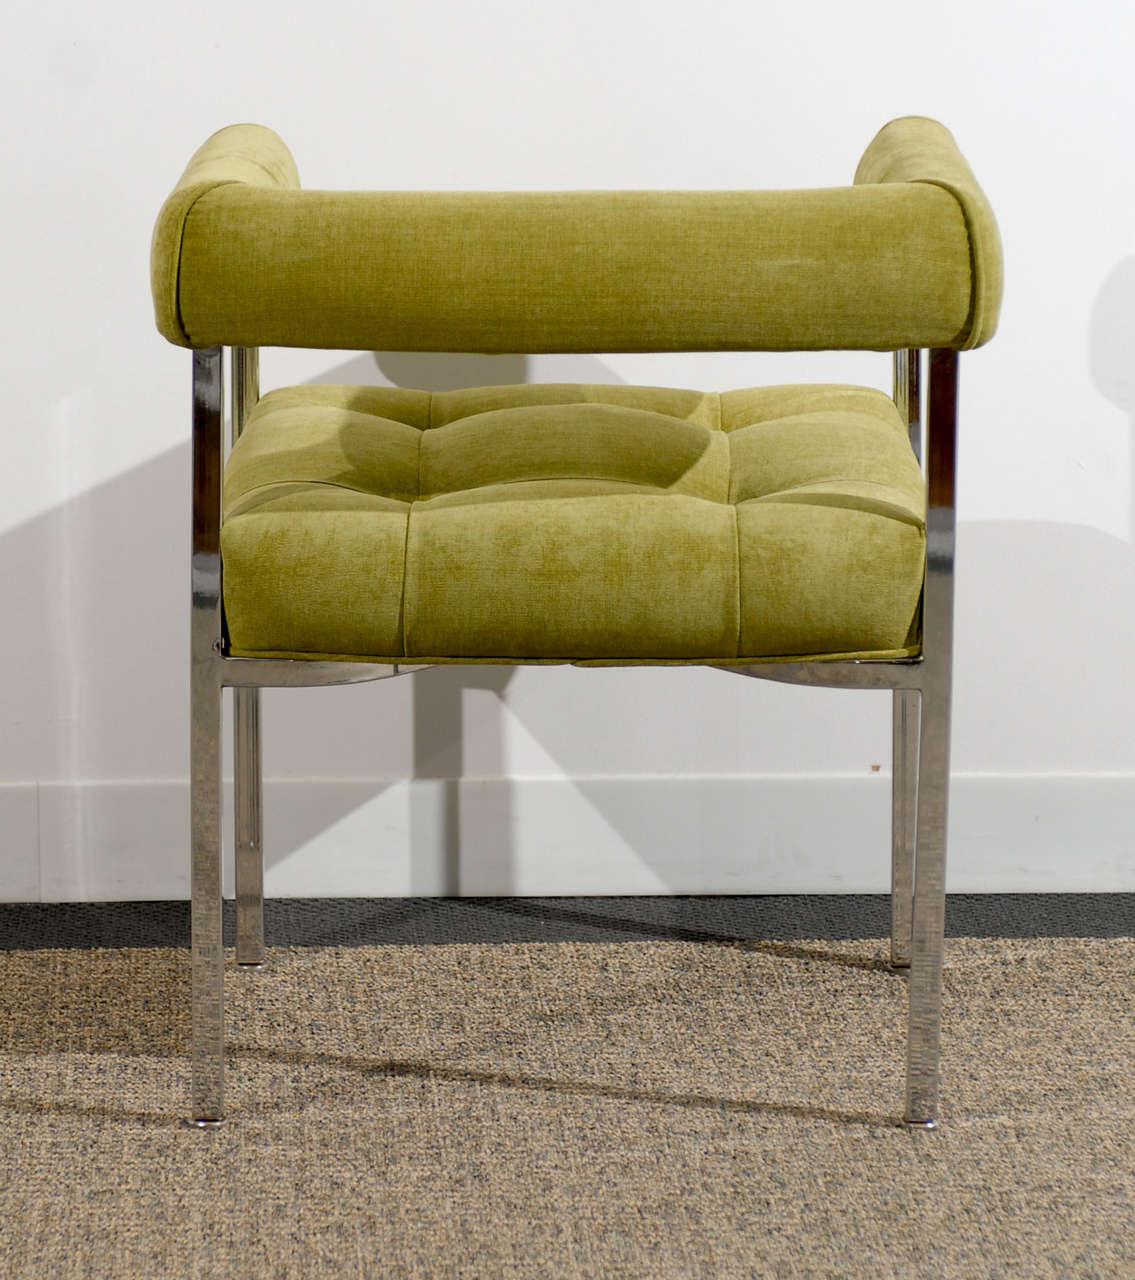 Beautiful Milo Baughman Style Chrome Armchairs in Lime Chenille In Excellent Condition For Sale In Atlanta, GA